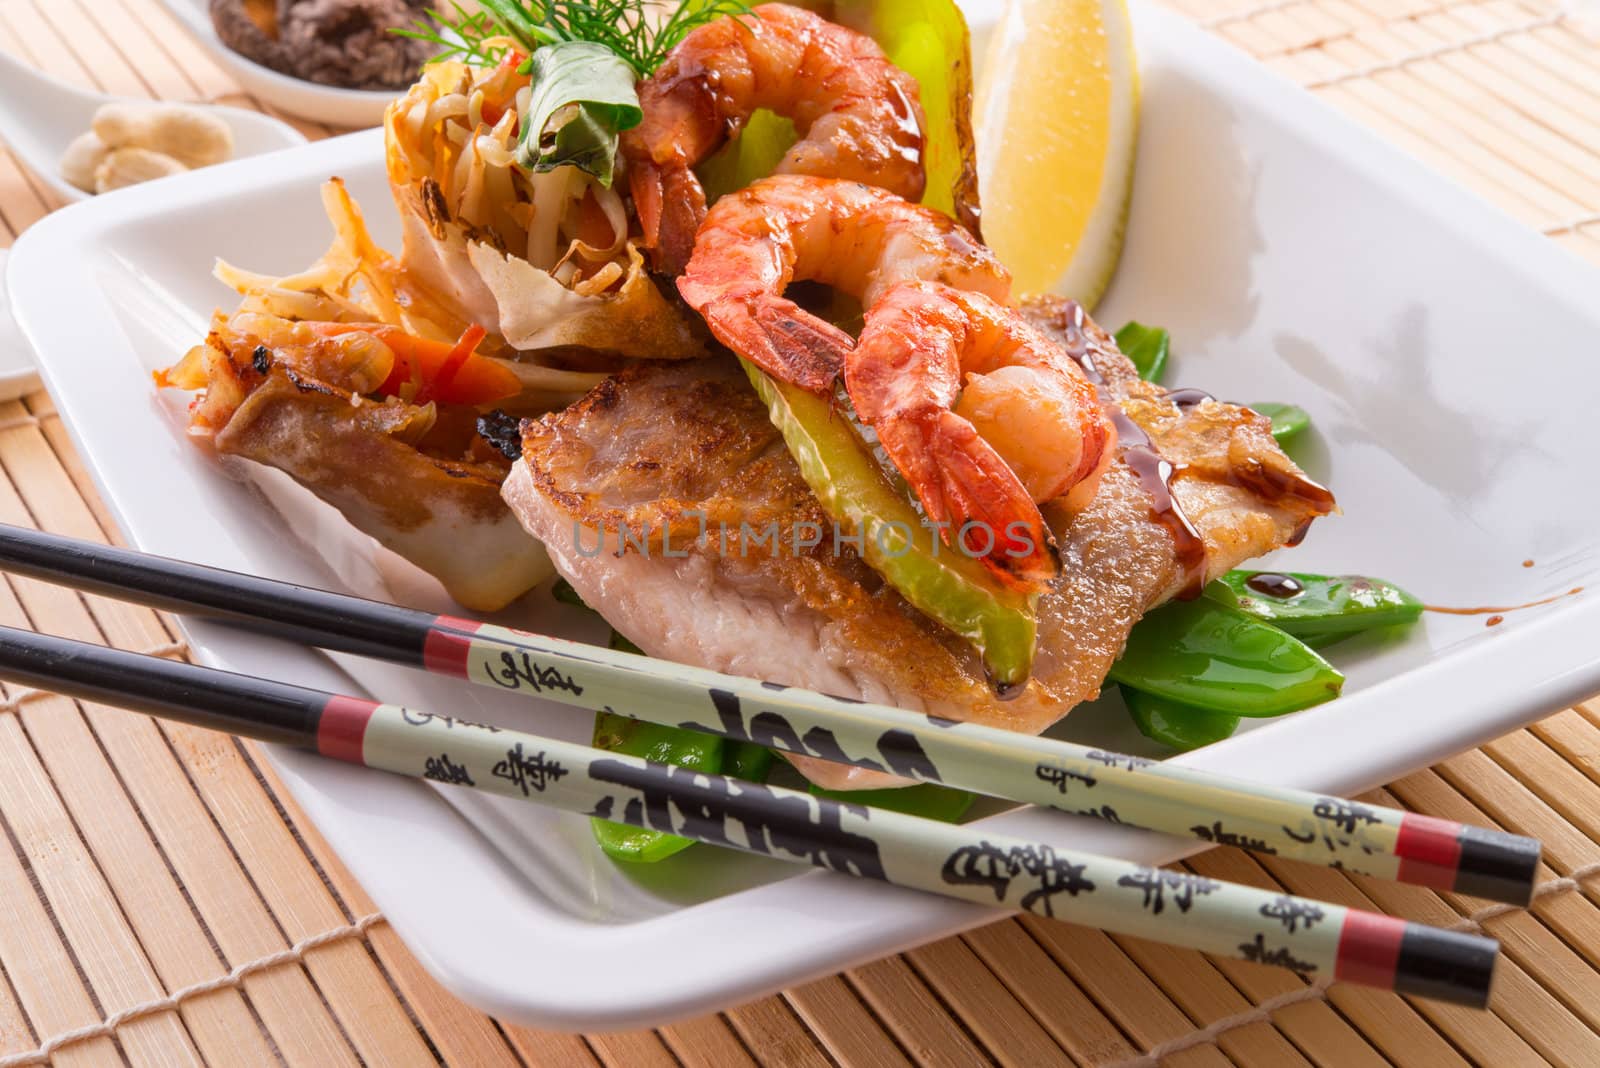 shrimps with fish and vegetables by Darius.Dzinnik